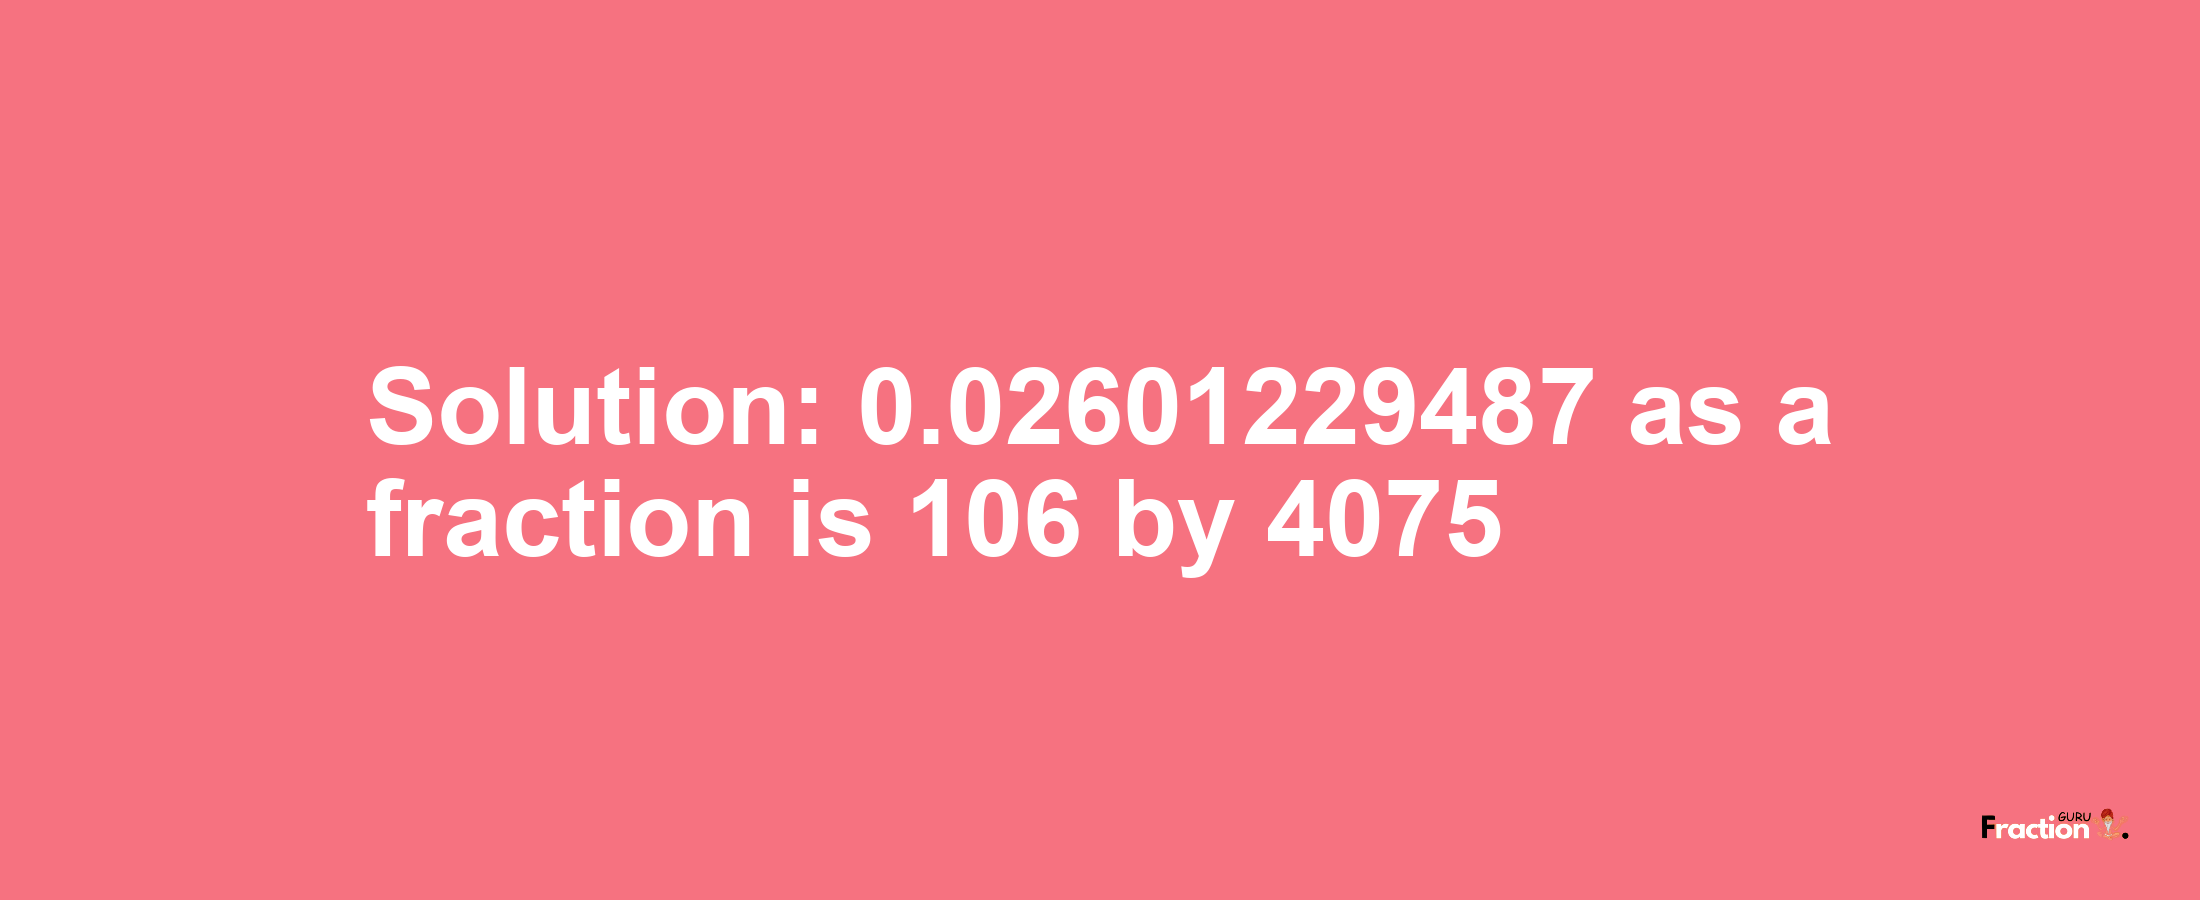 Solution:0.02601229487 as a fraction is 106/4075